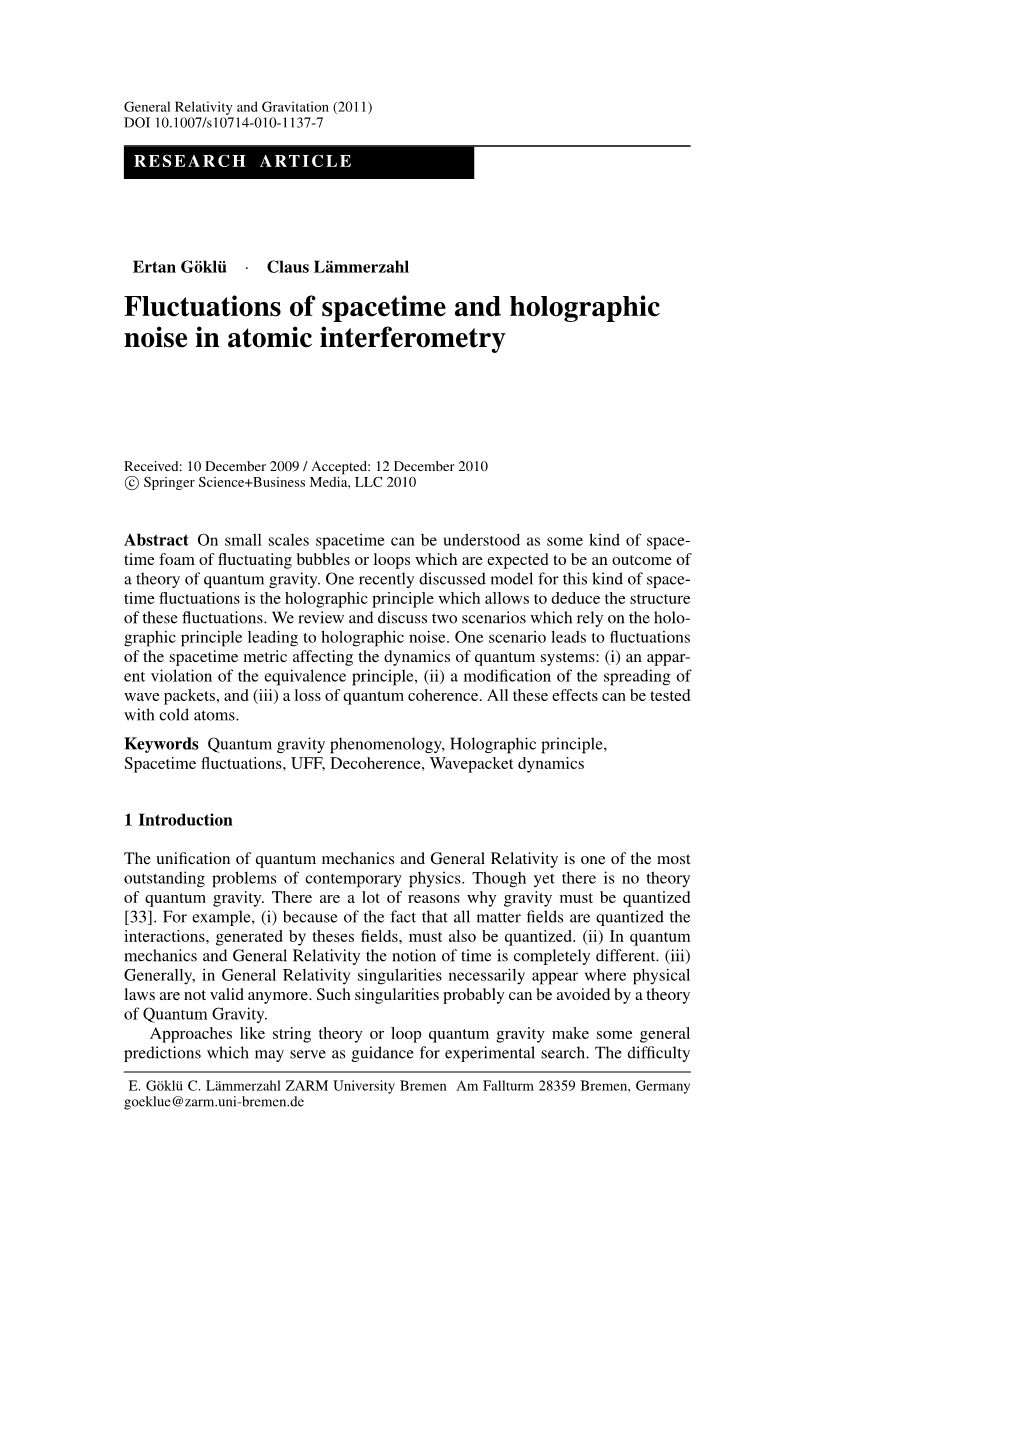 Fluctuations of Spacetime and Holographic Noise in Atomic Interferometry